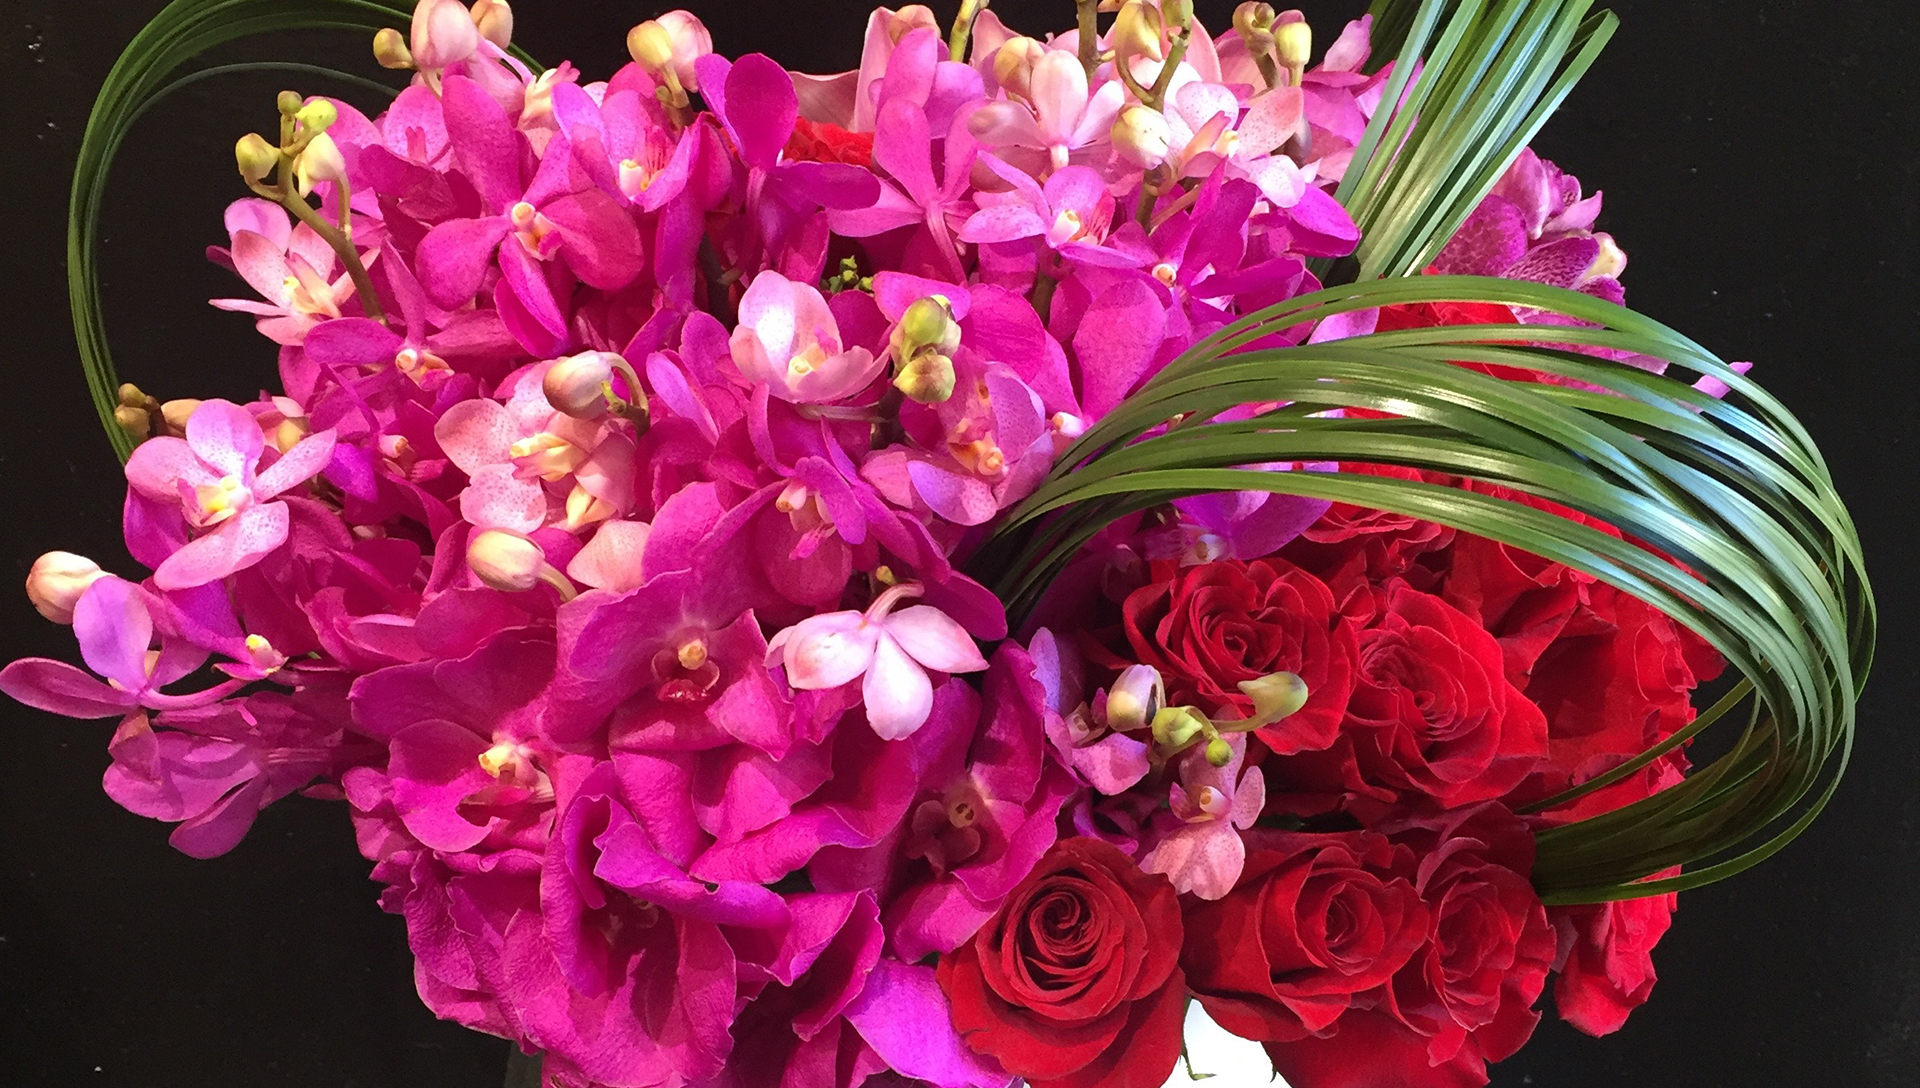 New York Florist | Flower Delivery by Flowers on the Park